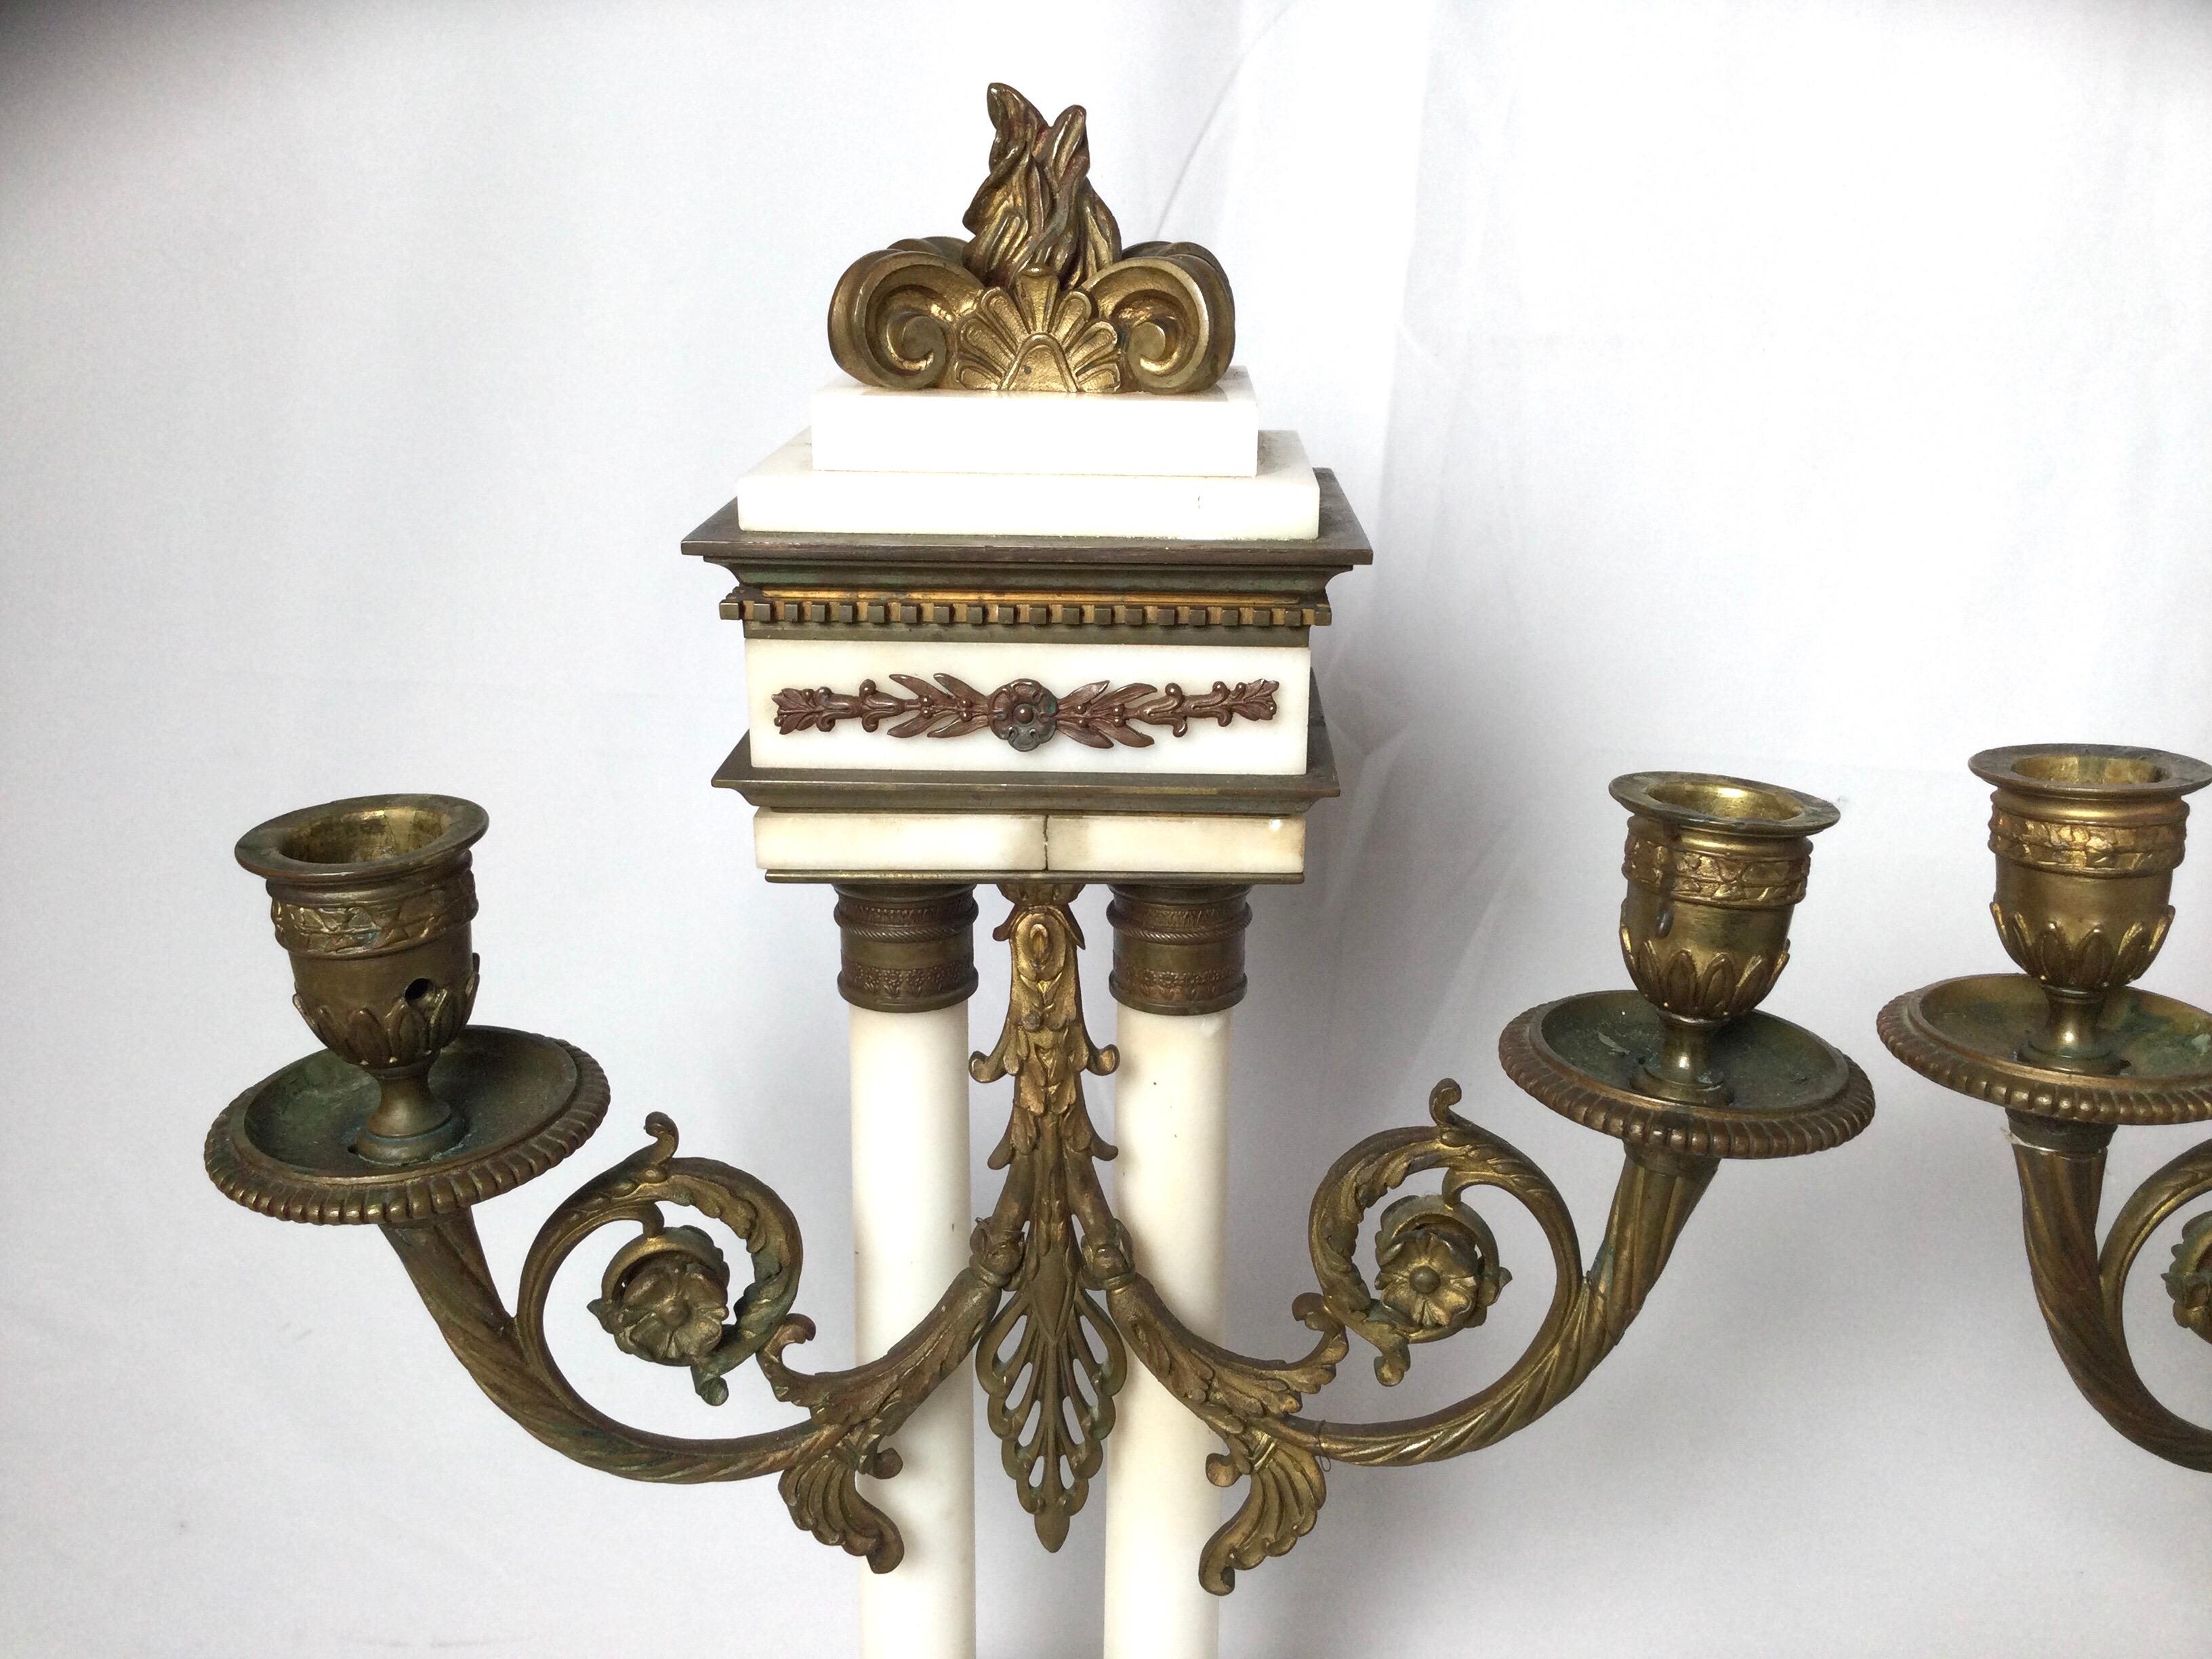 Neoclassical Revival Late 19th Century Pair of  French Bronze and Marble Candelabras For Sale